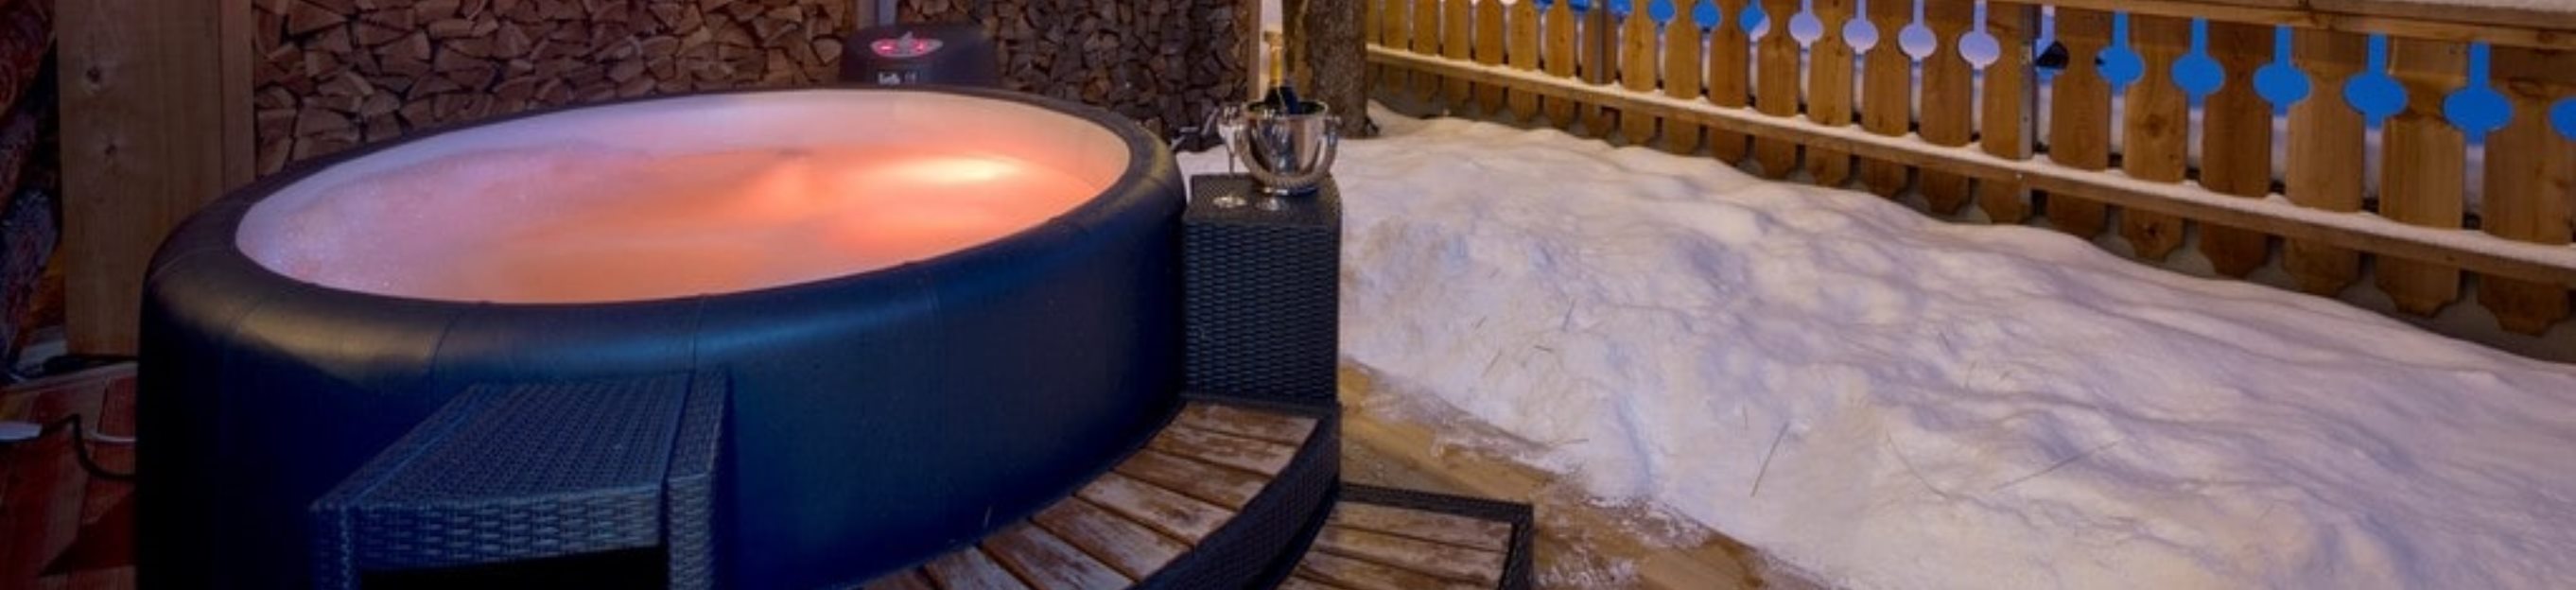 Softubs & Round Hot Tubs Banner